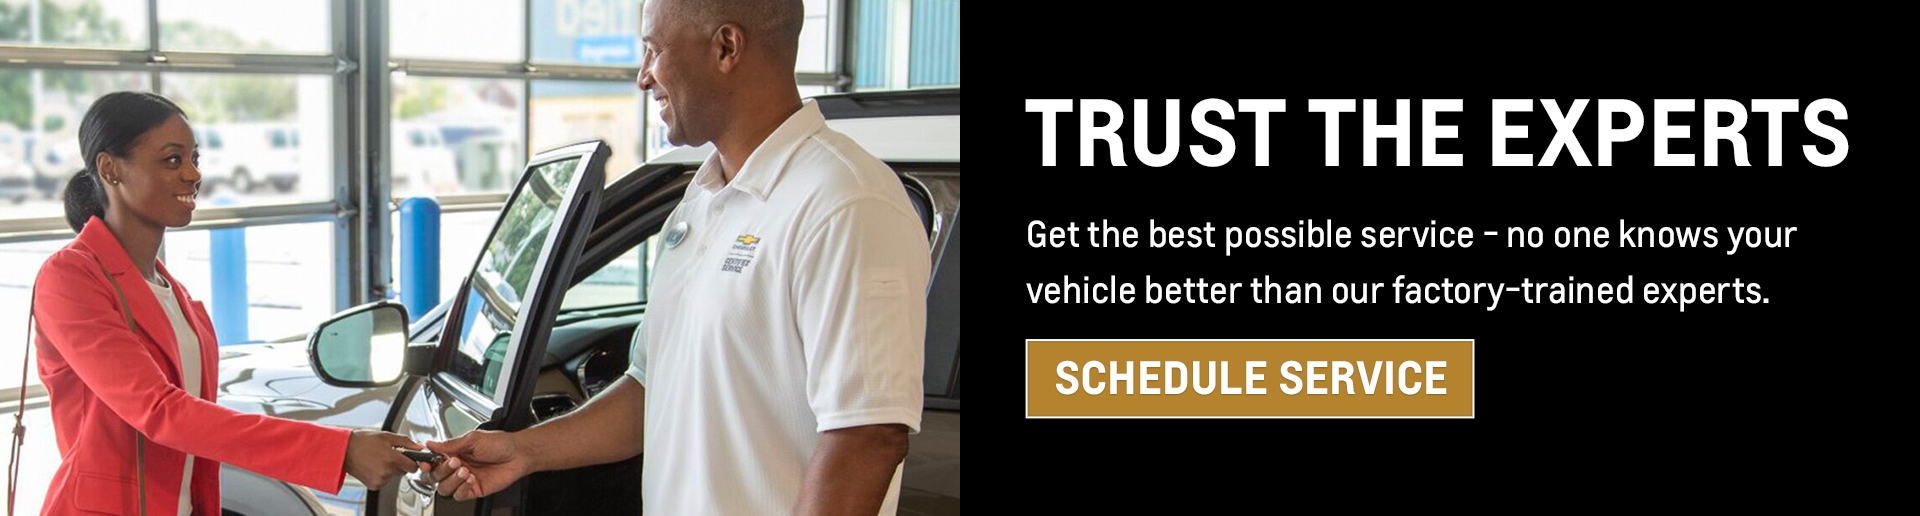 Trust the experts for all your Chevy Service needs. | Chevy Drives Chicago | Chicagoland &amp; NW Indiana Chevy Dealers